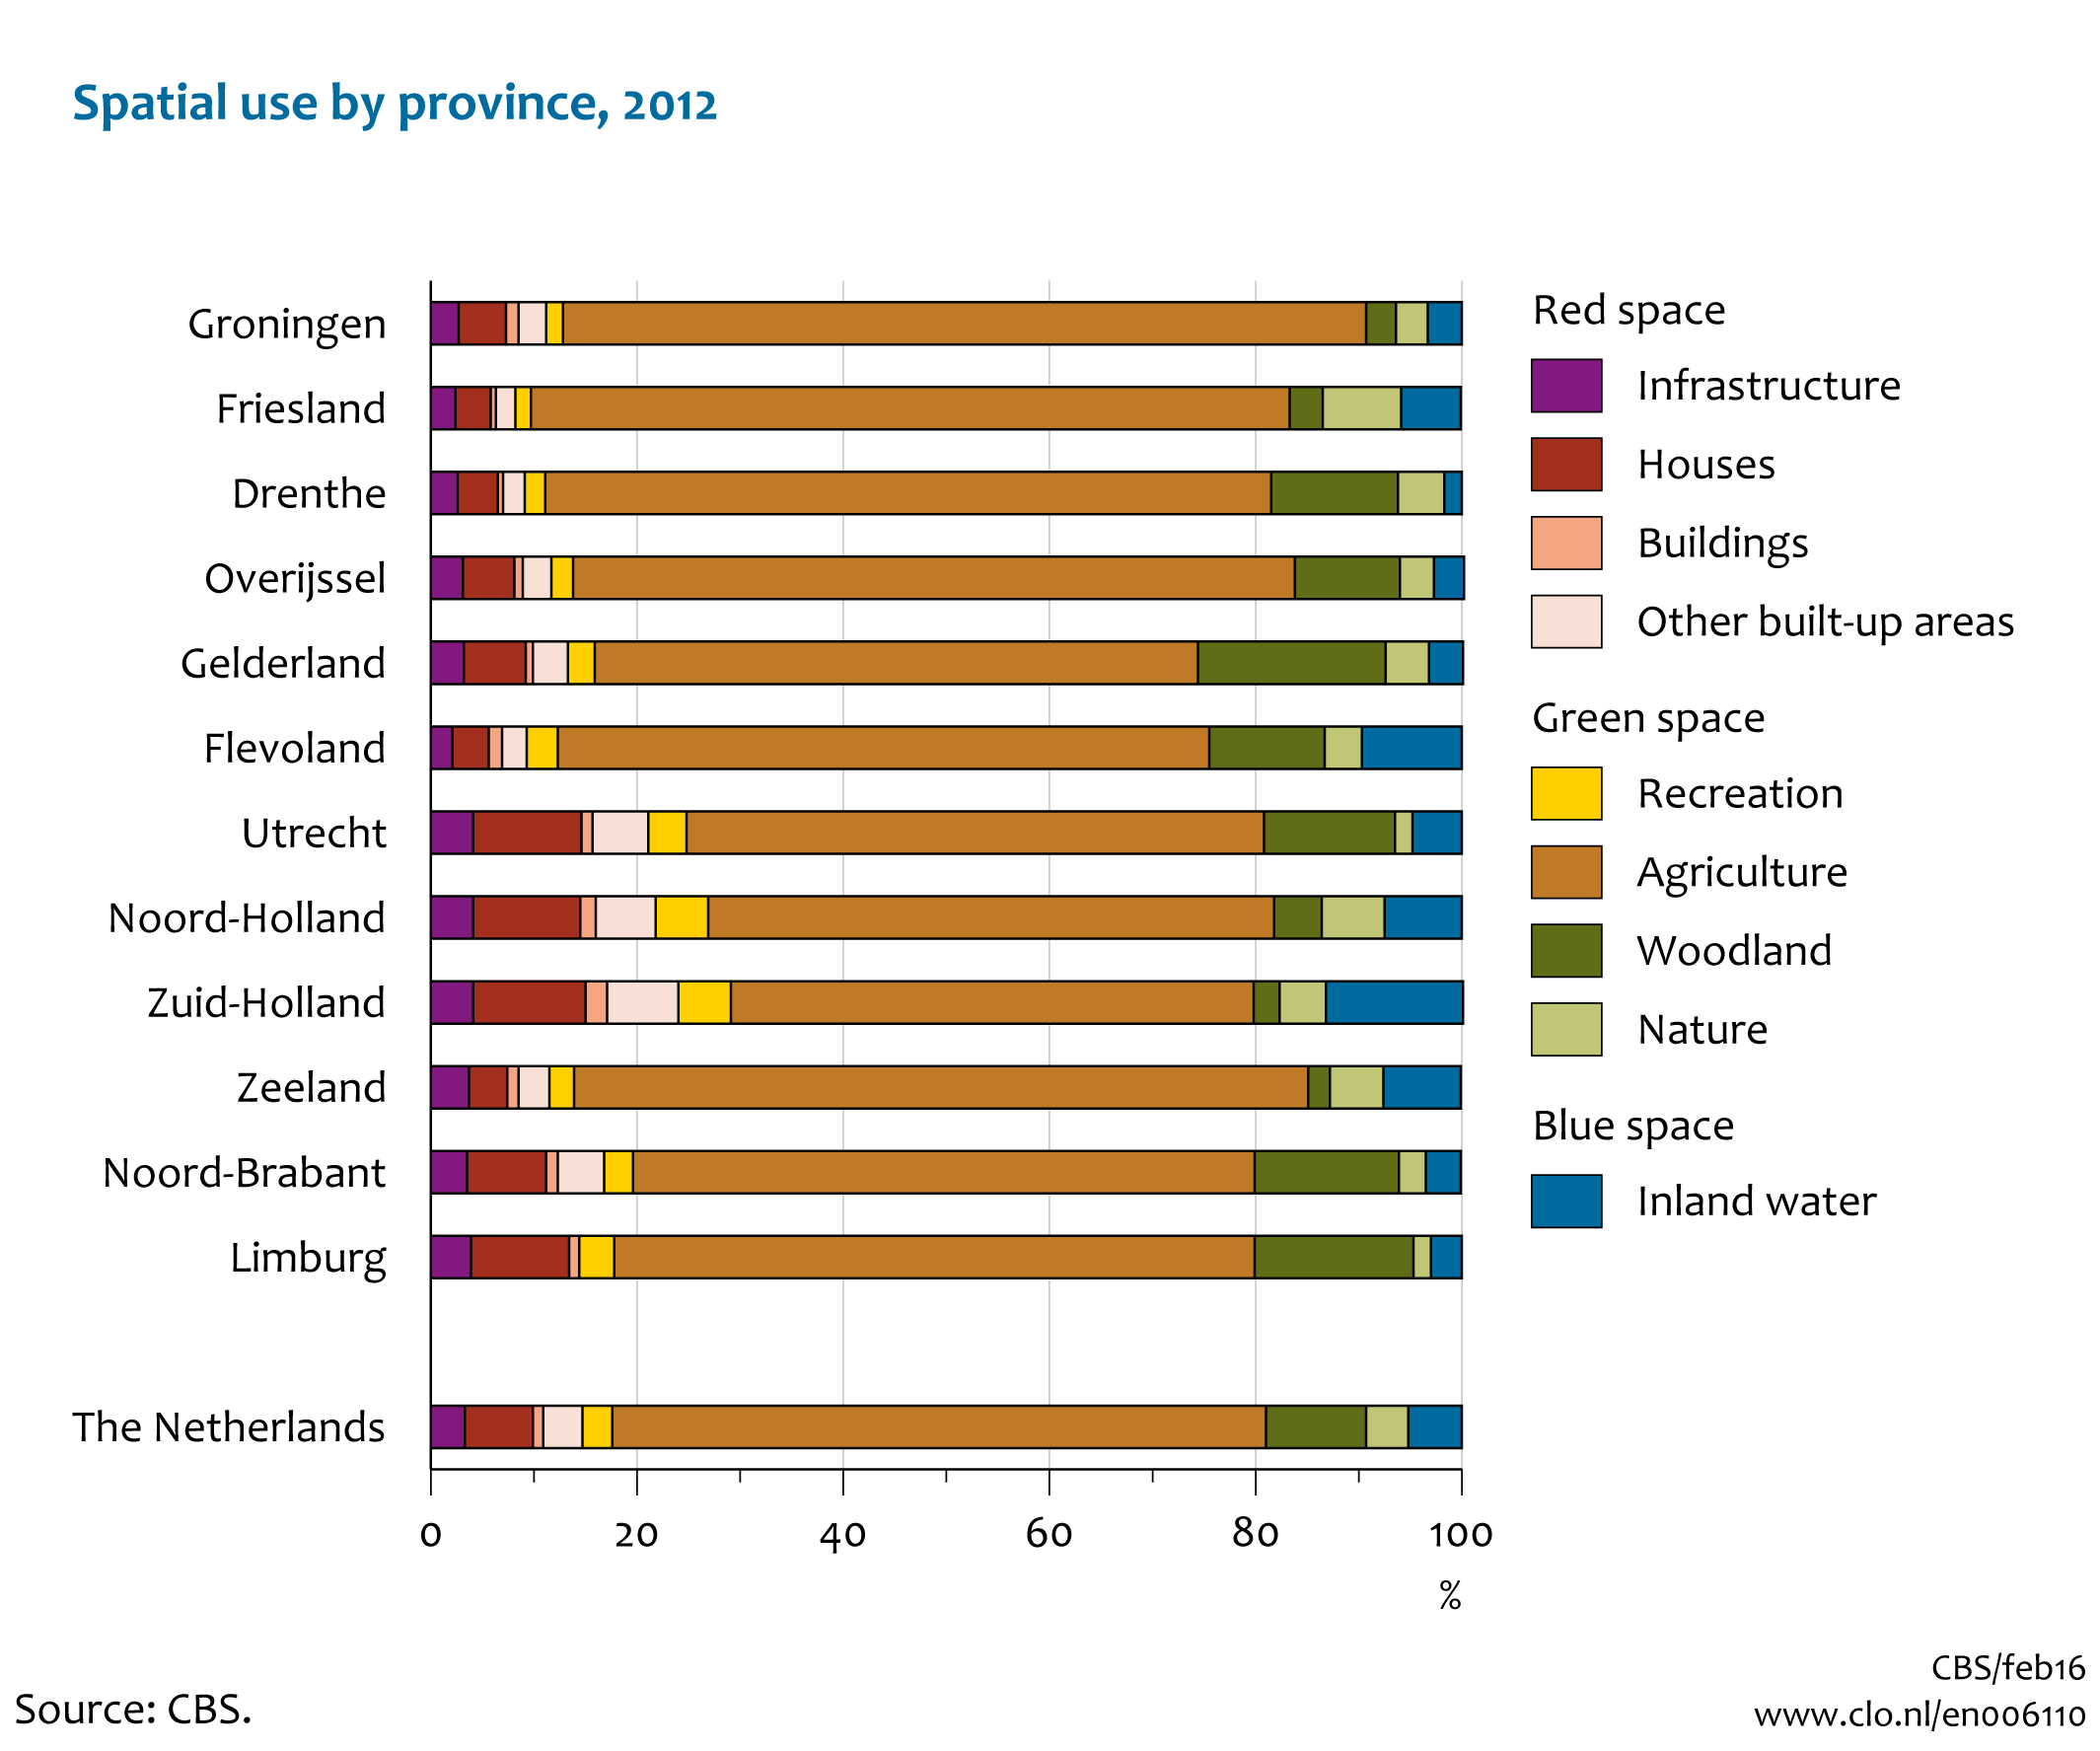 Image Spatial use by province, 2012. The image is further explained in the text.